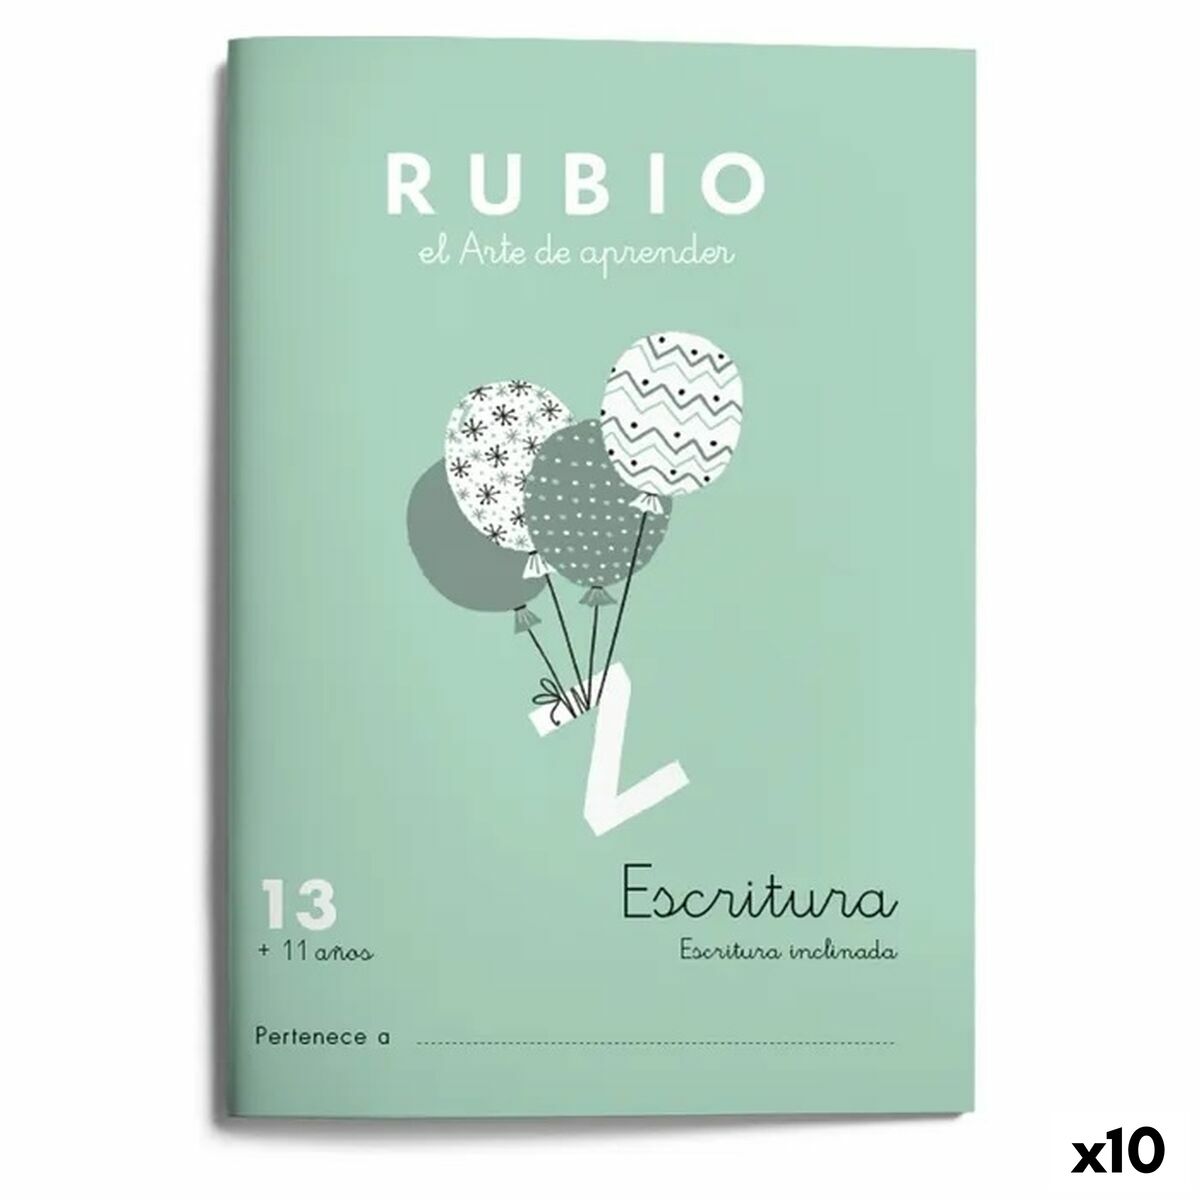 Writing and calligraphy notebook Rubio Nº13 A5 Spanish 20 Sheets (10Units)